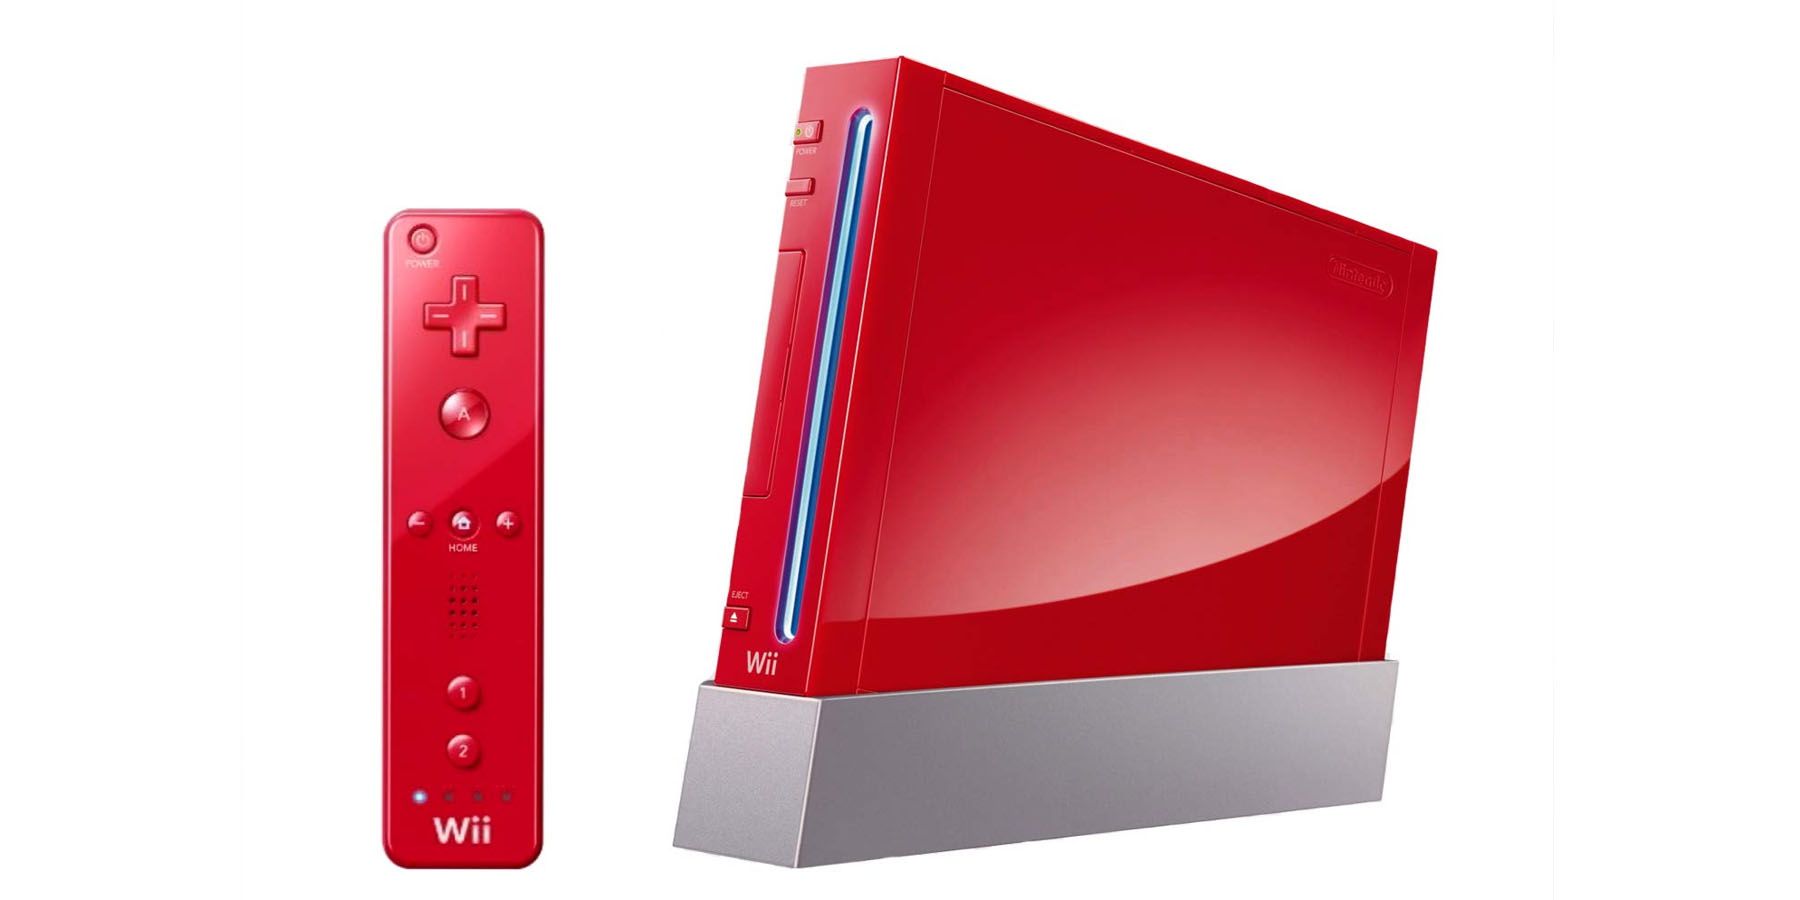 An image of a red Nintendo Wii console and Wiimote against a white background.